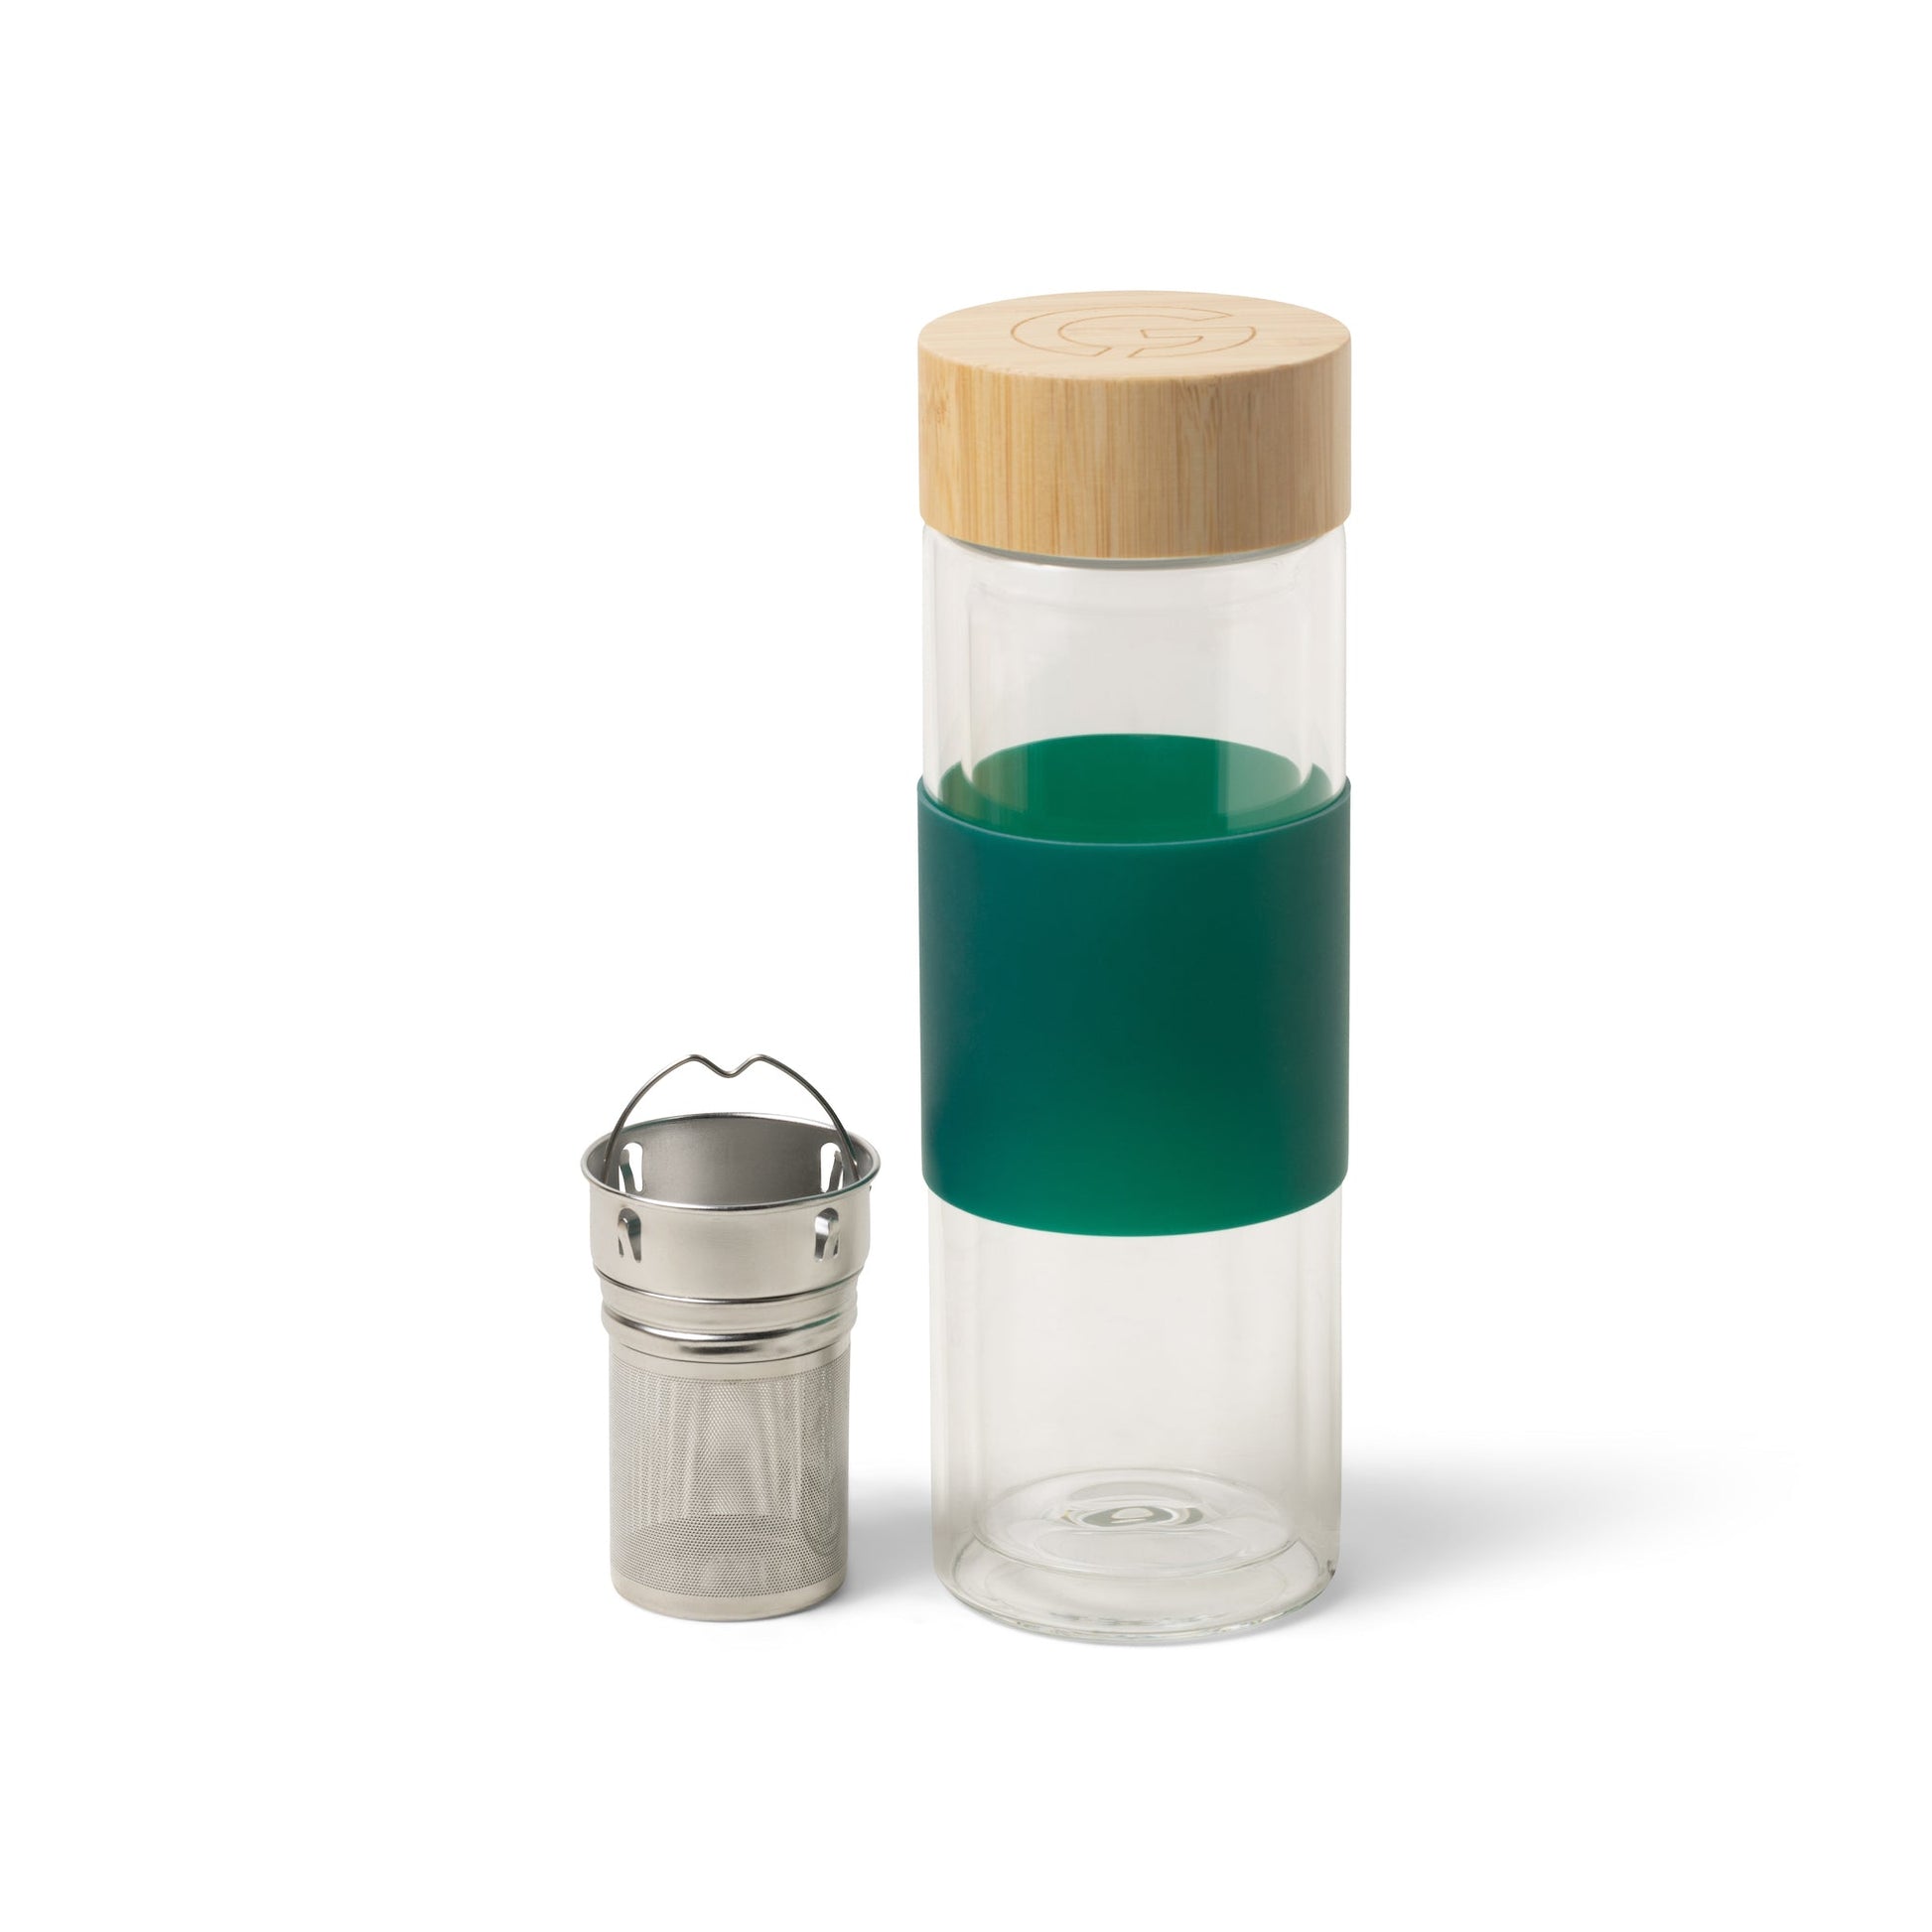 To-Go Tea Infuser Tumbler side by side teal band and infuser drop in